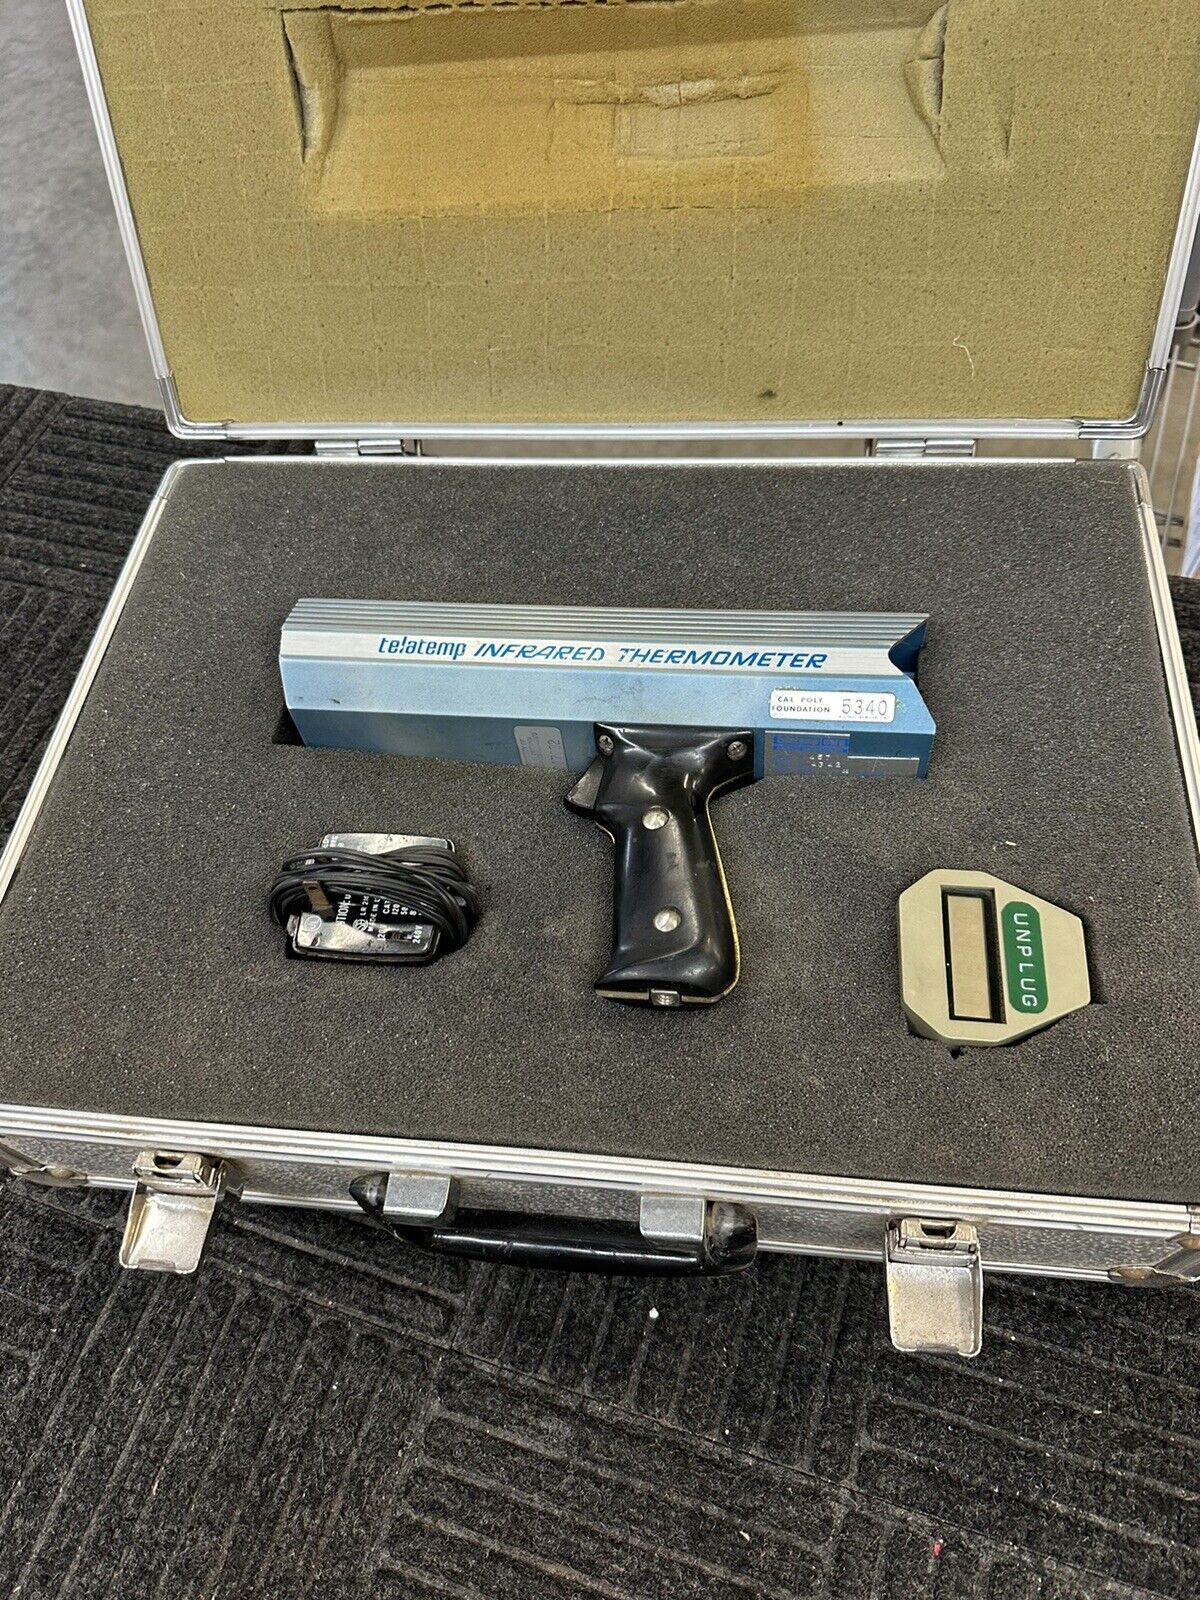 Telatemp Surface Thermometey INFRARED THERMOMETER AG42 Vintage 